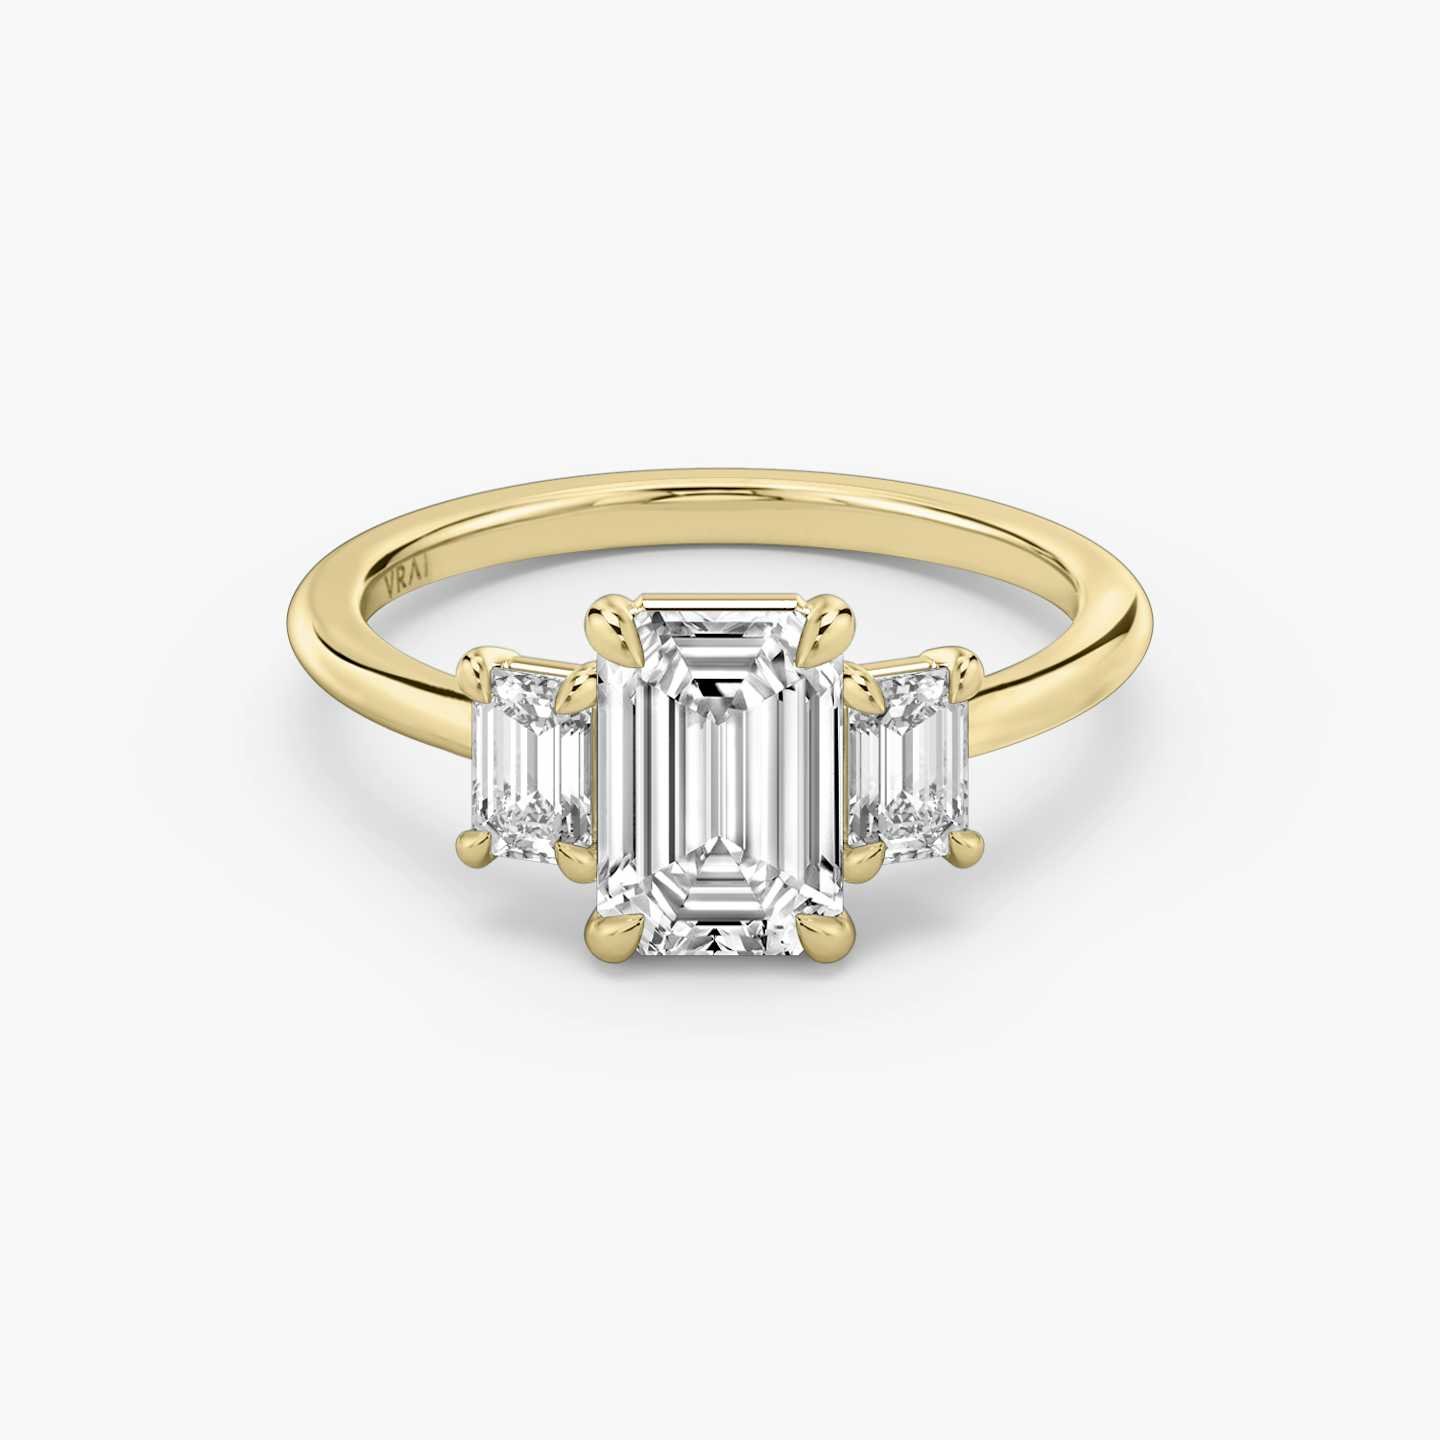 emerald cut diamond engagement ring with yellow band